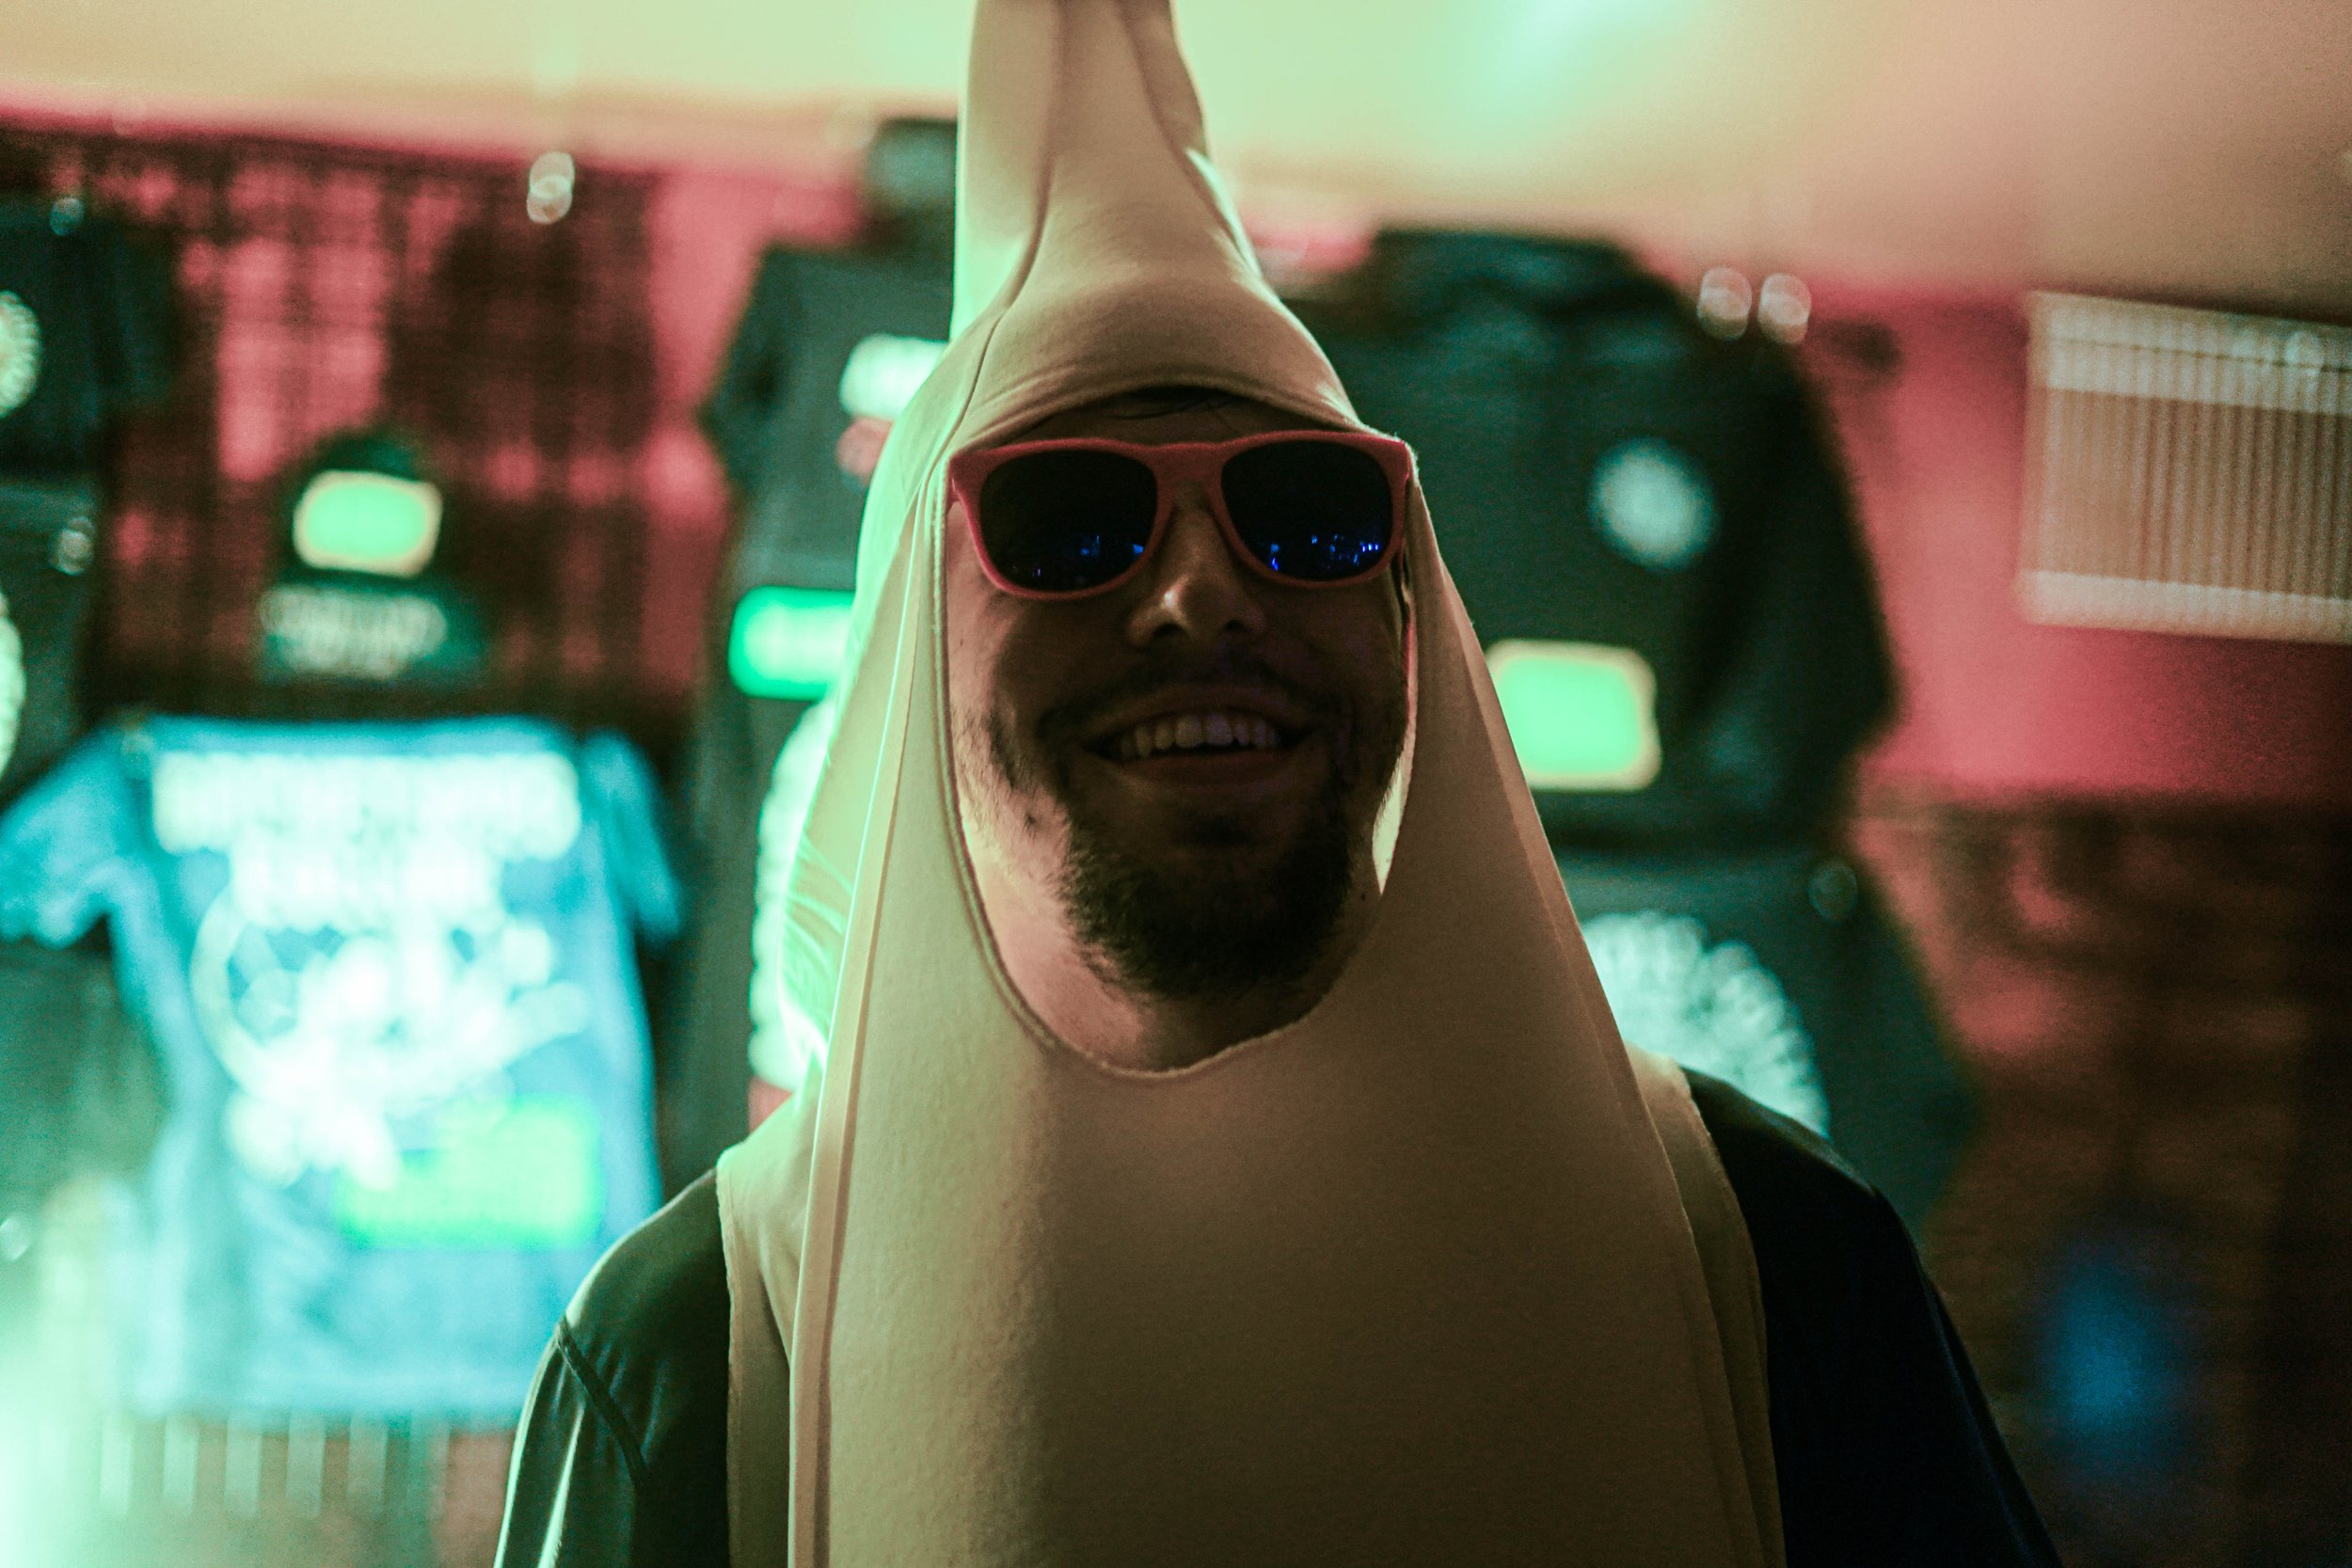 A Gentleman in a Banana Suit at The Amity Affliction